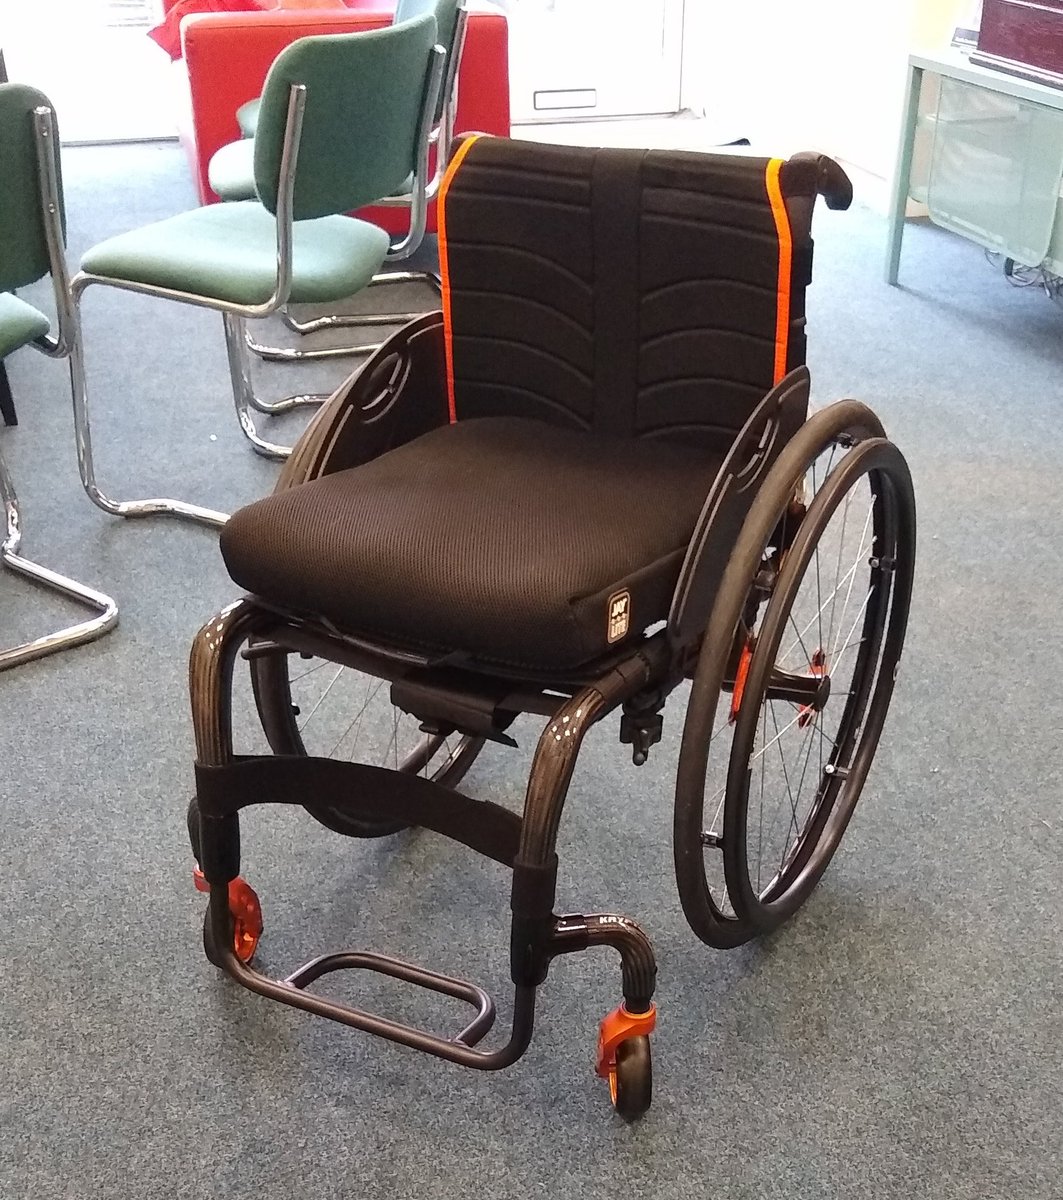 It's #InternationalWheelchairDay! Shout out to my wonderful manual chair that doubles the amount of stuff I can do each week! :D #WheelchairsAreFreedom